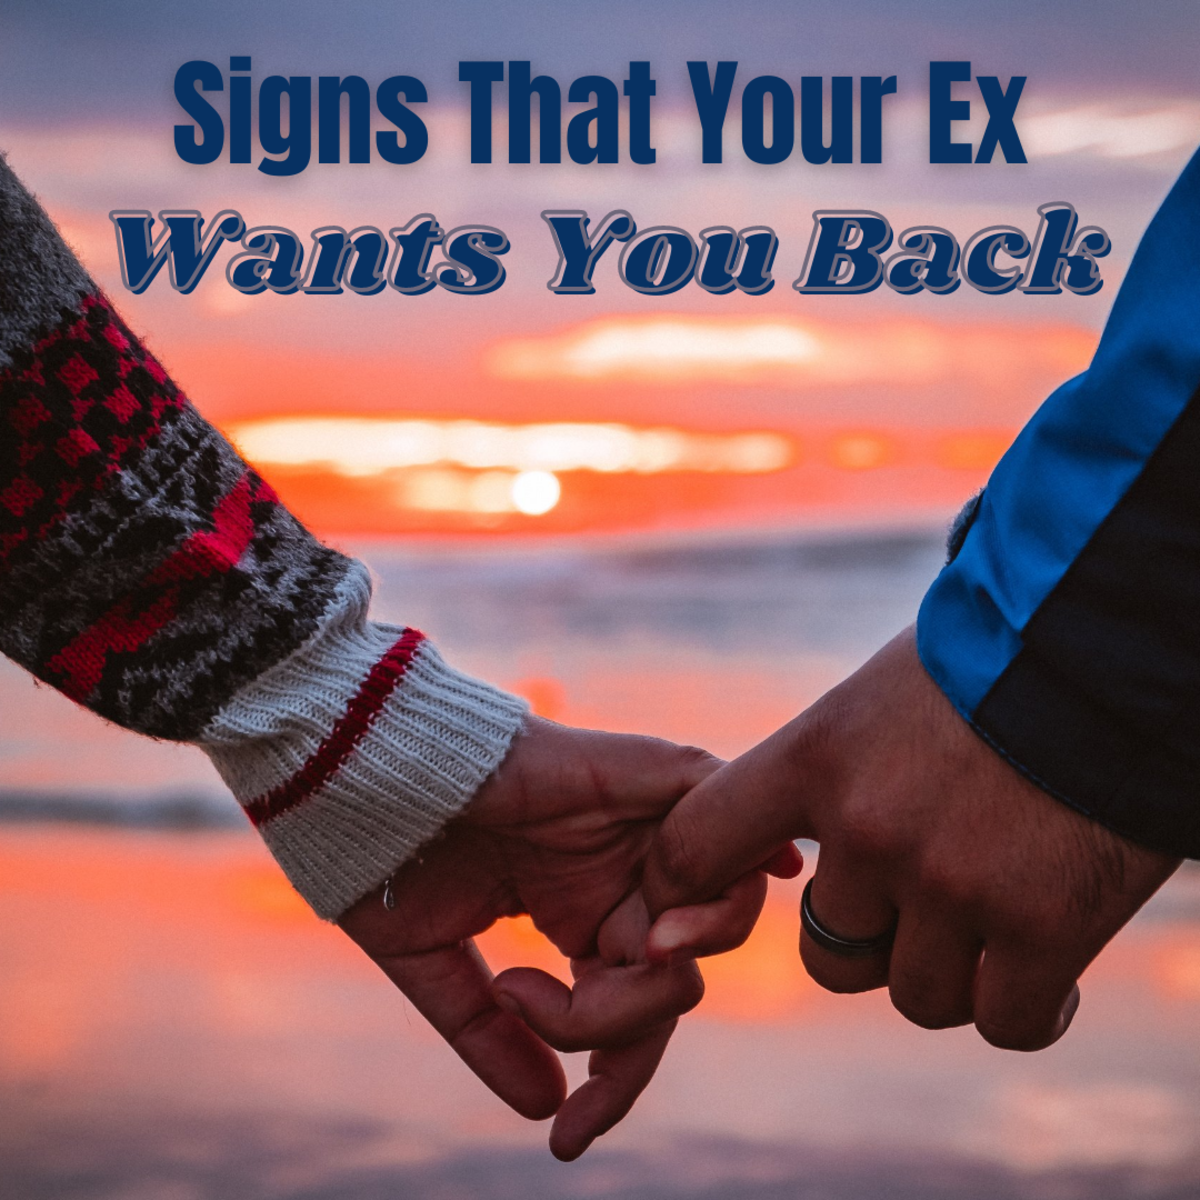 21 Signs That Your Ex Still Loves You and Wants You Back